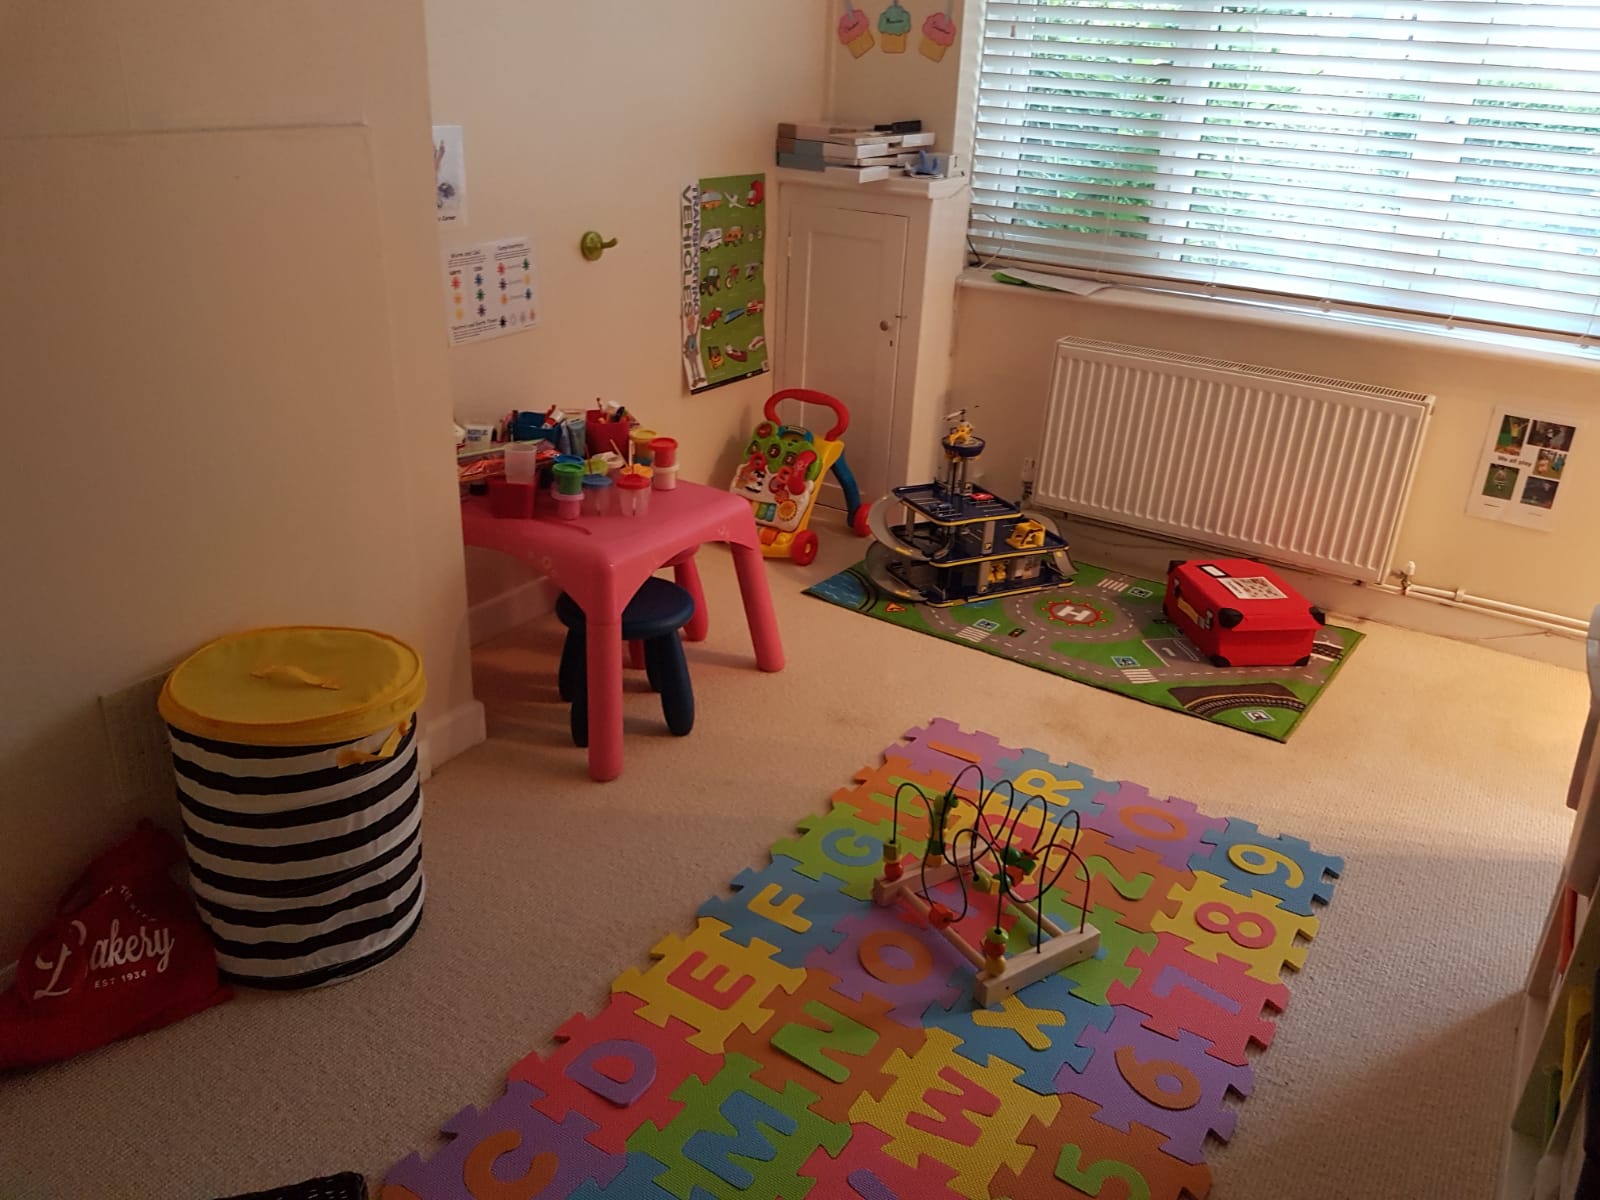 Second picture of childs playroom located with the businesses premises